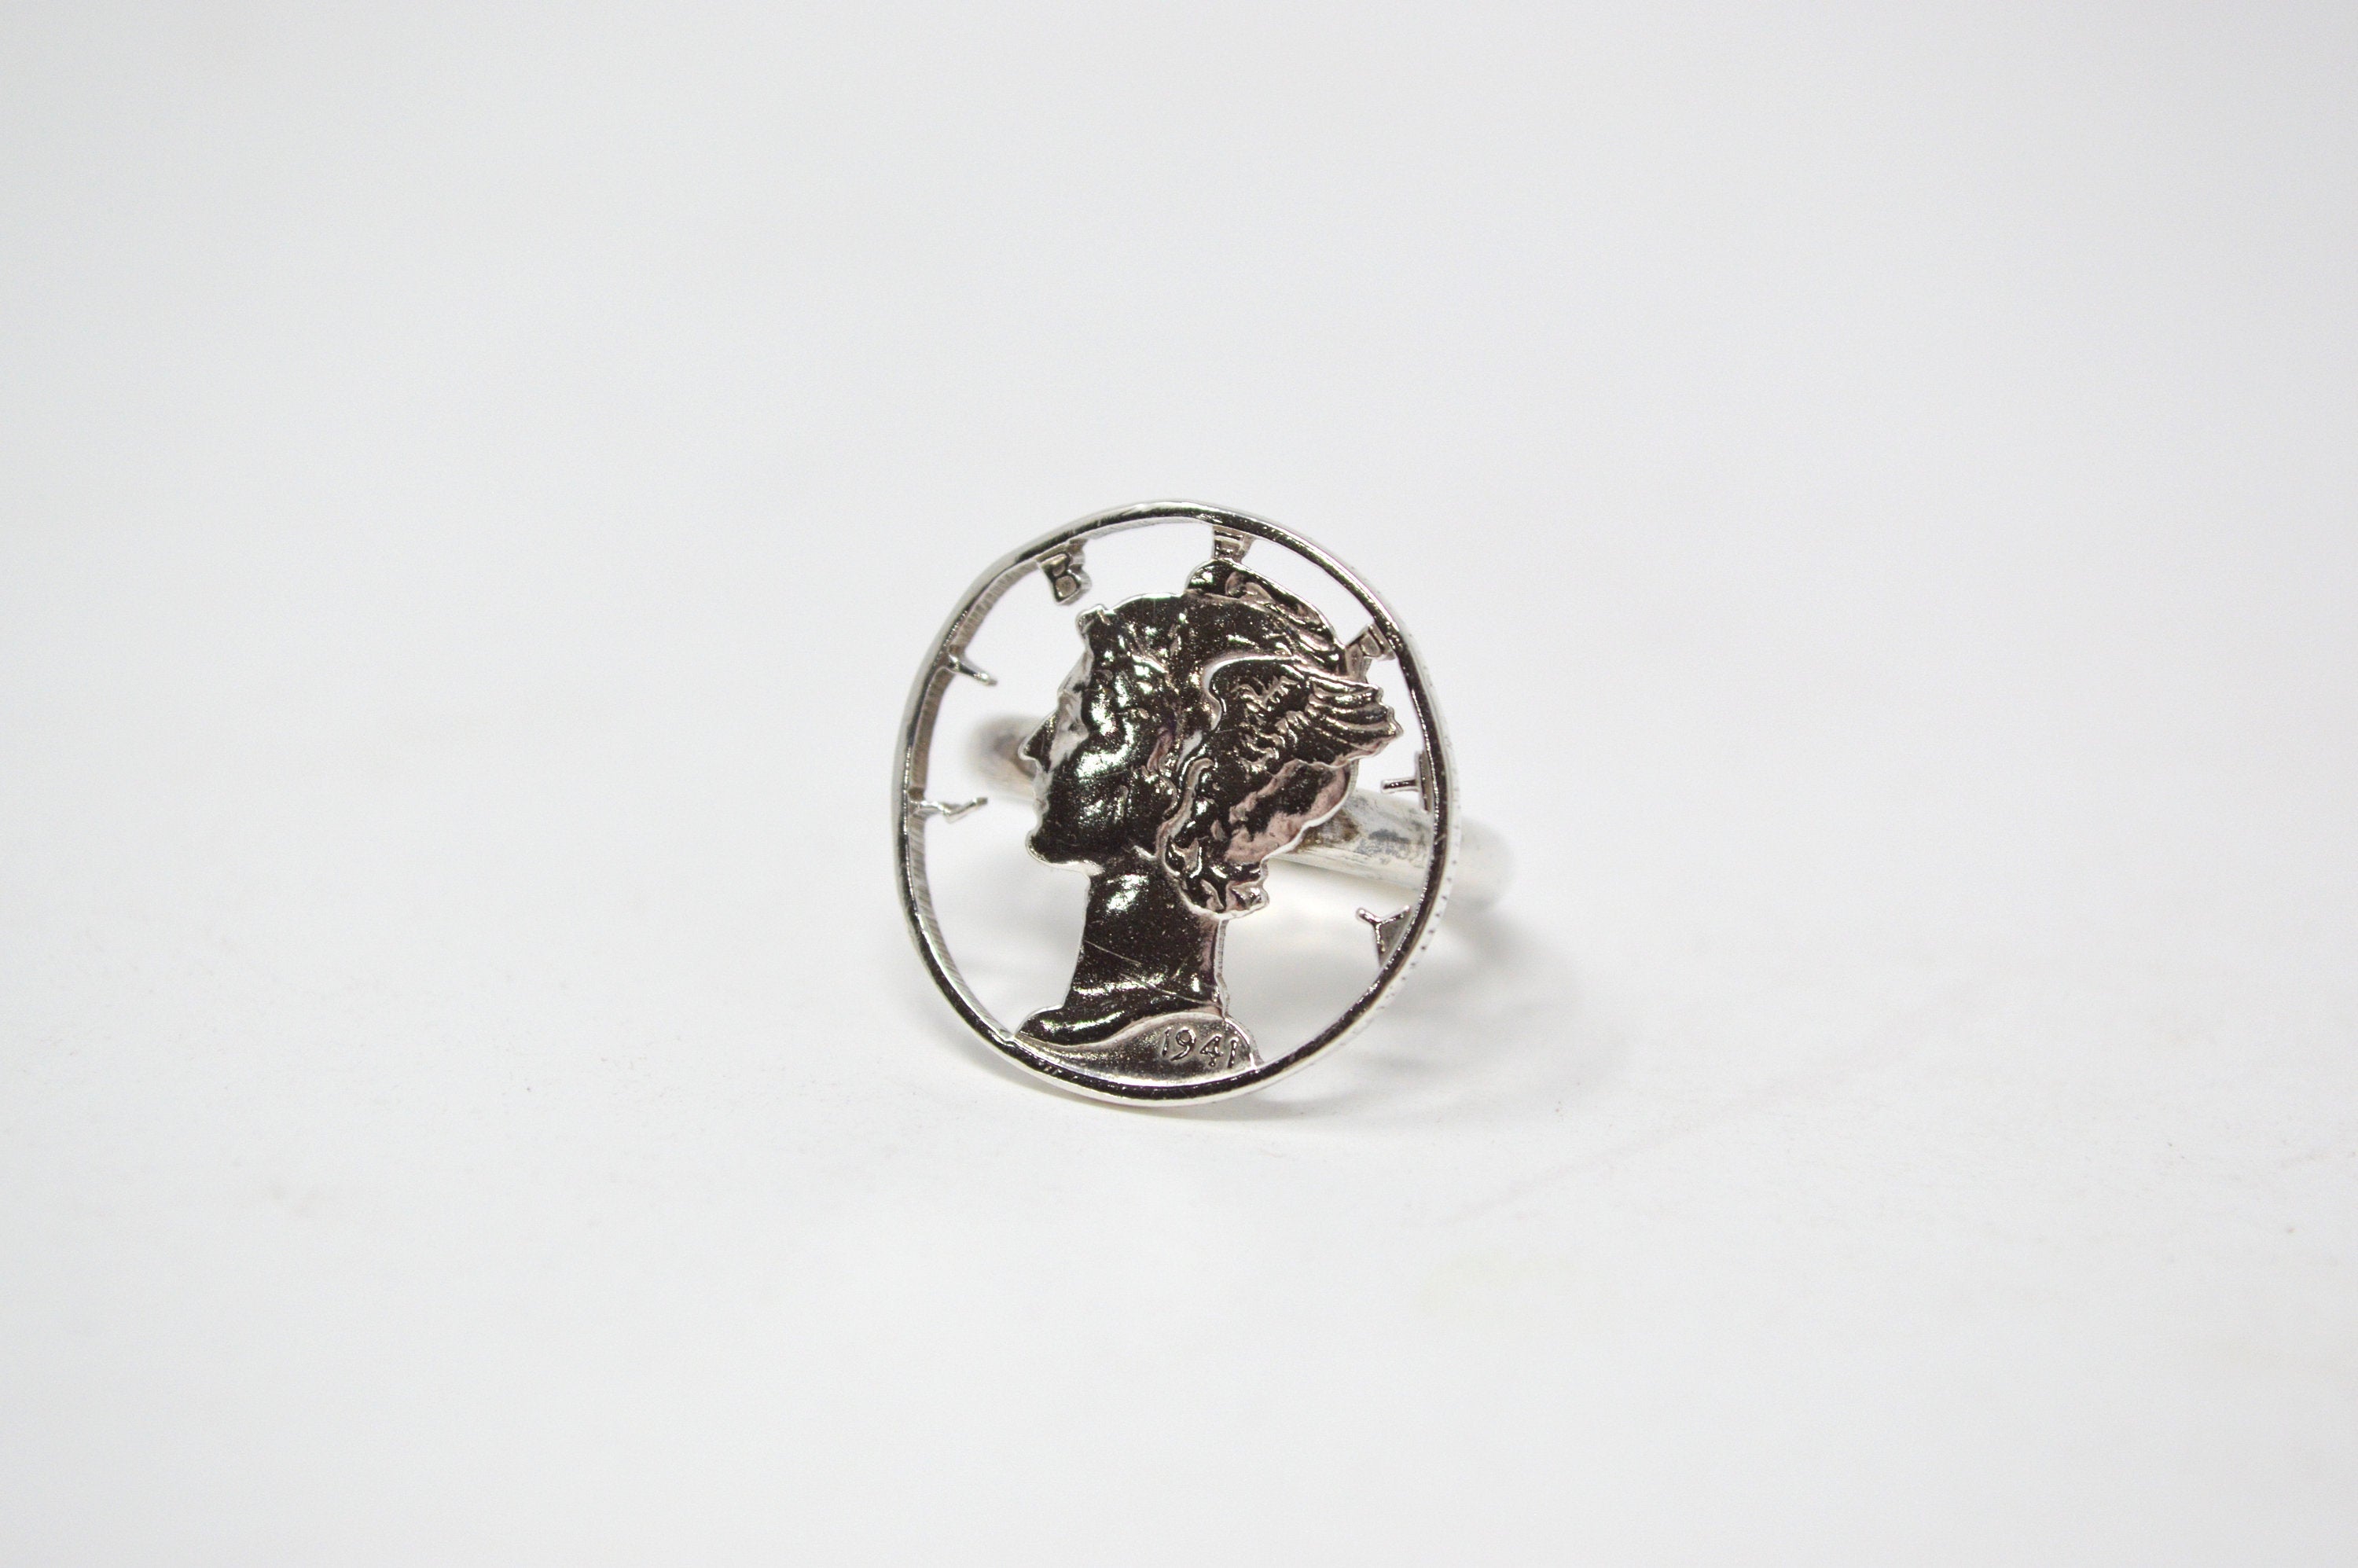 Antique 1941 Mercury Dime Sterling Silver Cutout Ring - Size 4.5 - Coin Jewelry